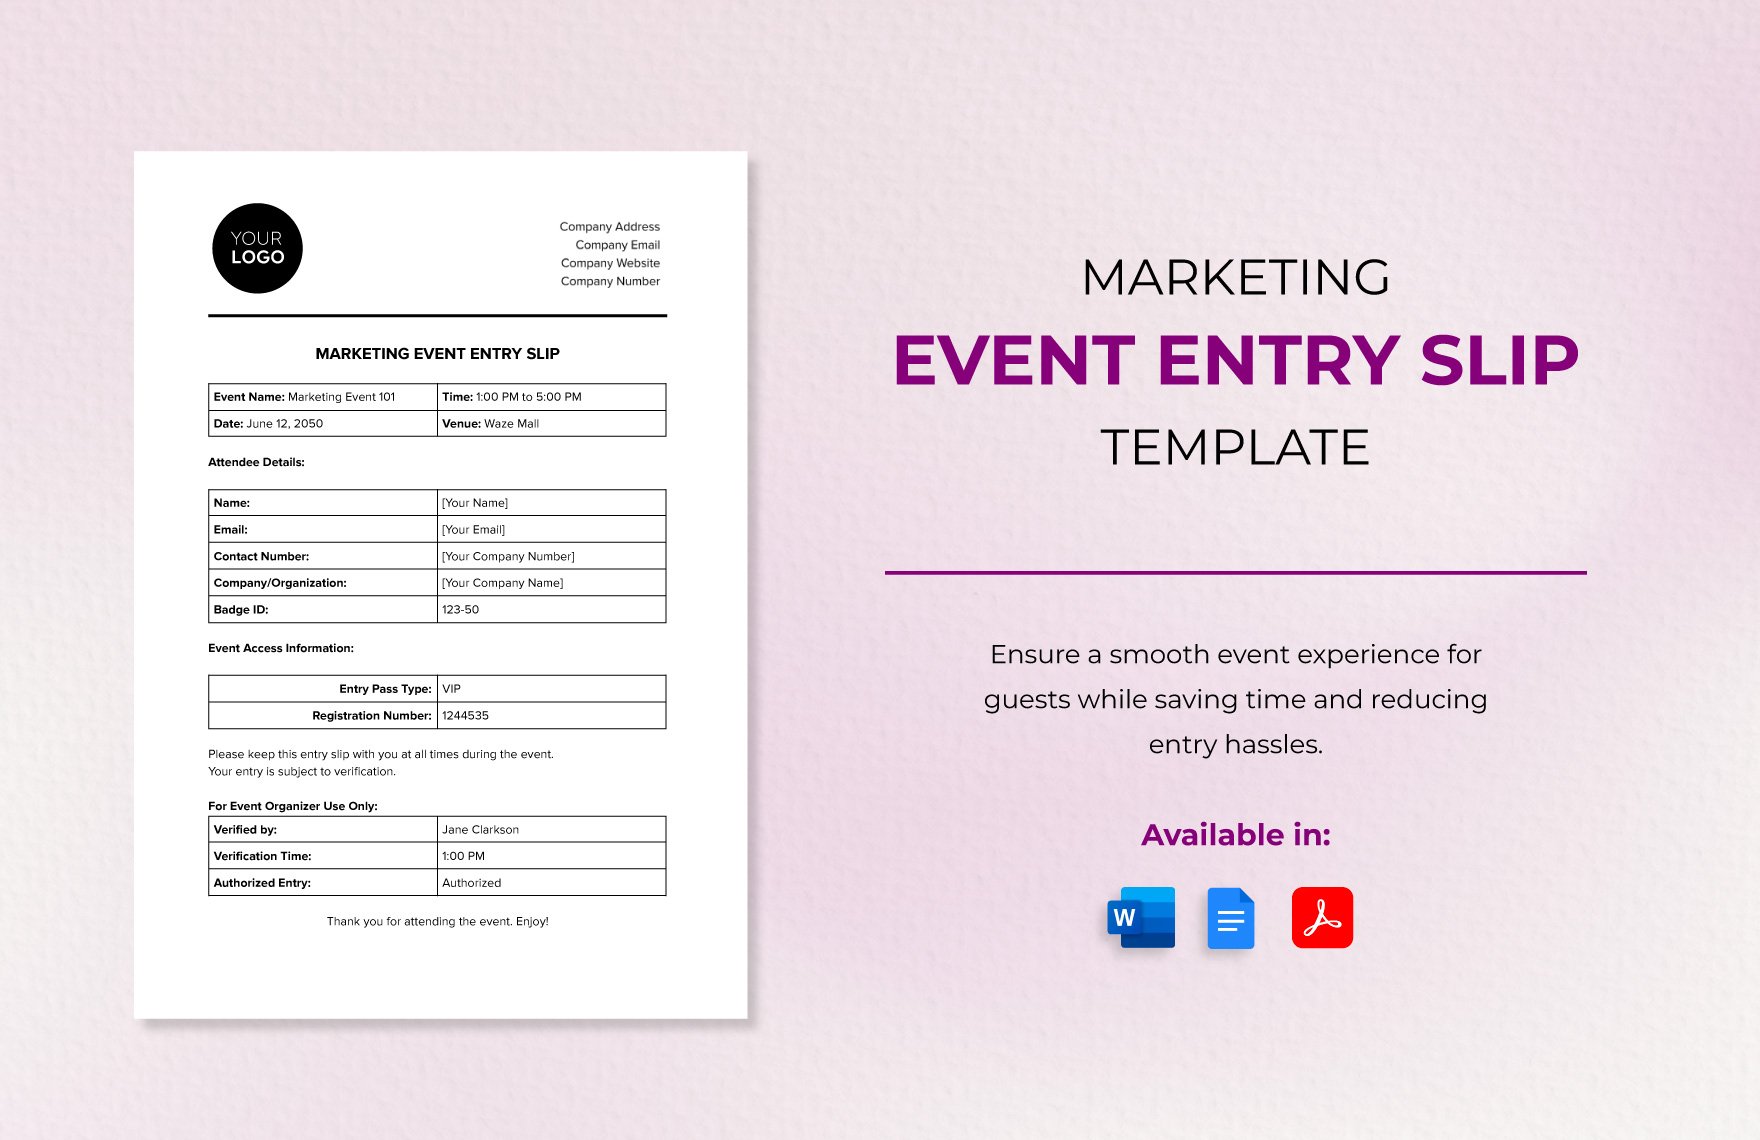 Marketing Event Entry Slip Template in Word, Google Docs, PDF